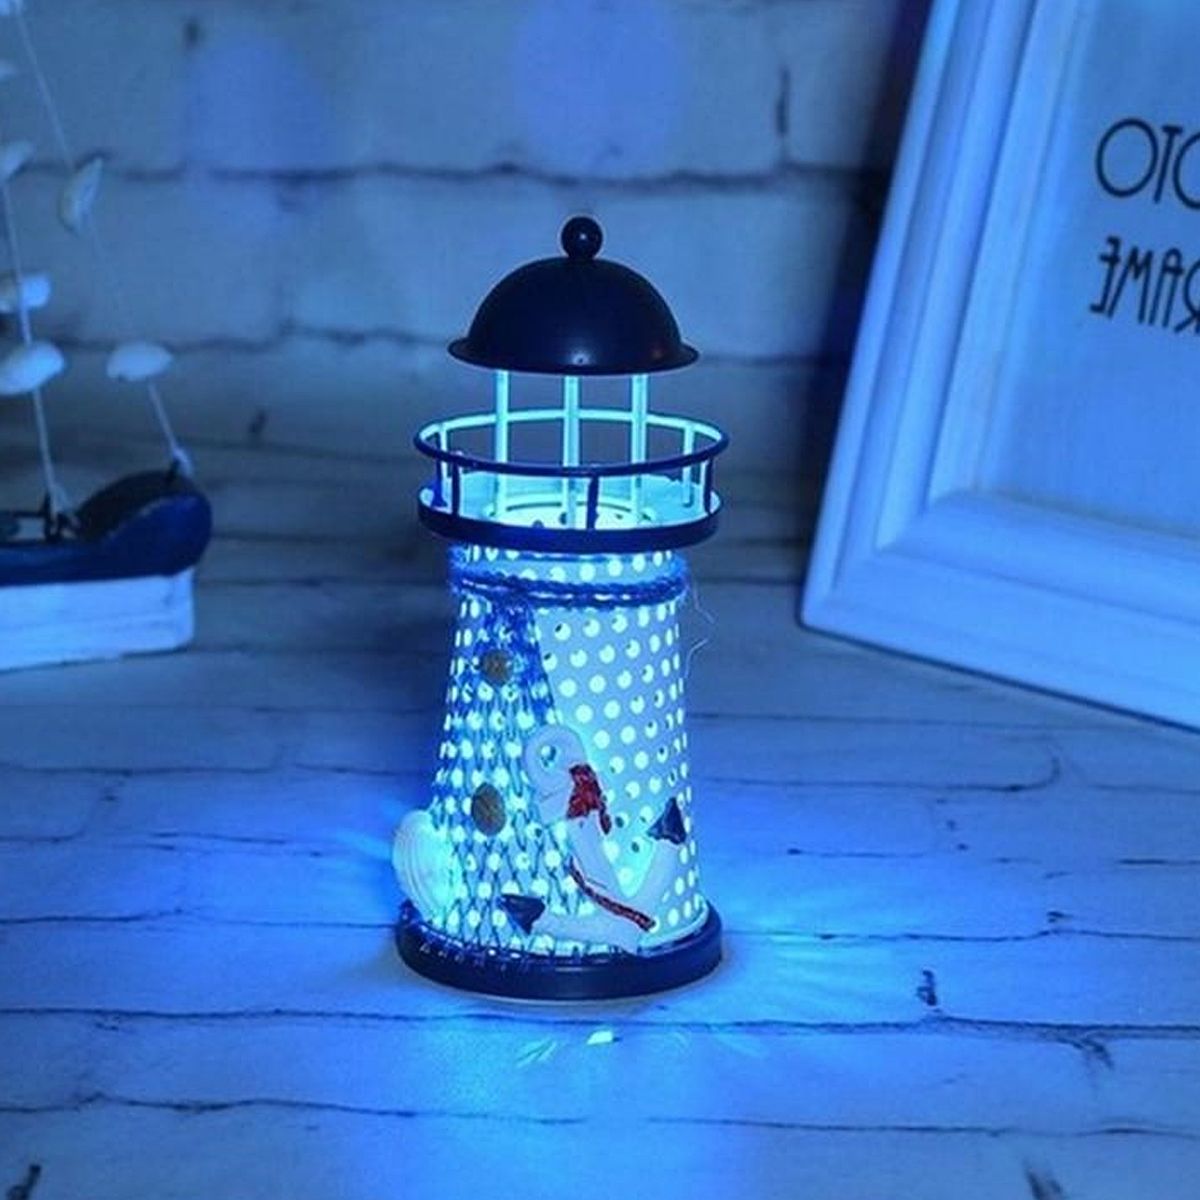 Nautical-Decor-Shabby-Metal-Lighthouse-Shell-Colorful-LED-Light-Home-Party-Decorations-1304682